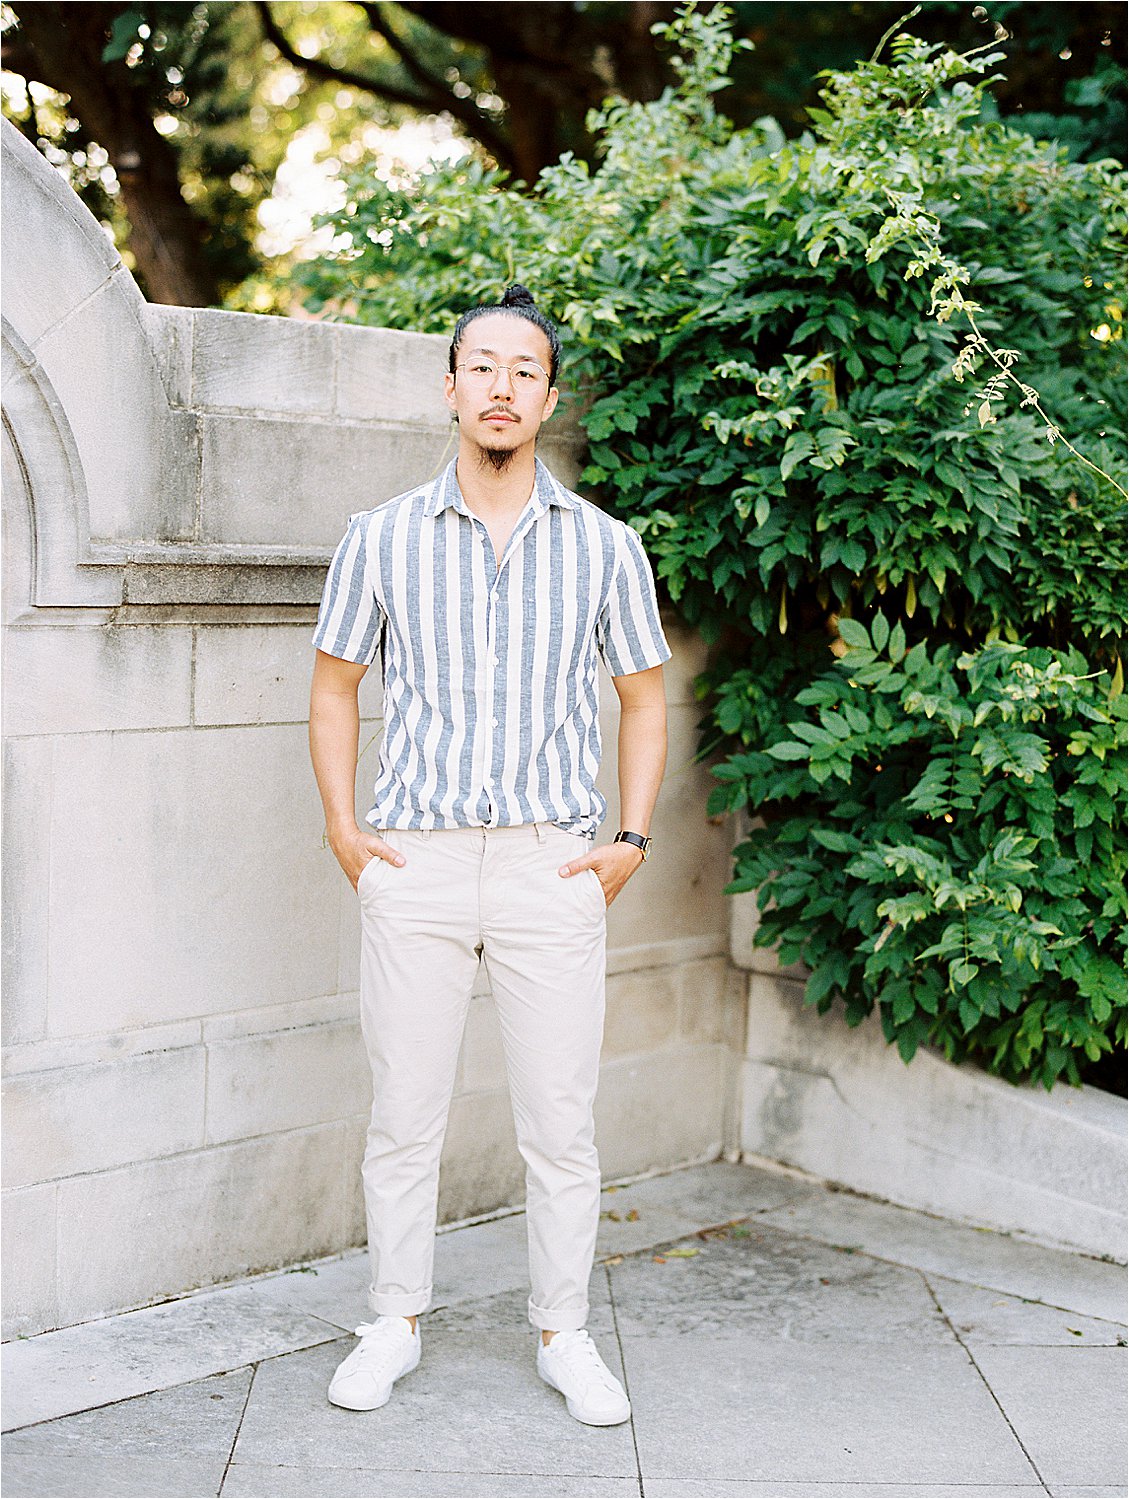 Summer casual outfit photographed by DC + Destination Film Wedding Photographer, Renee Hollingshead